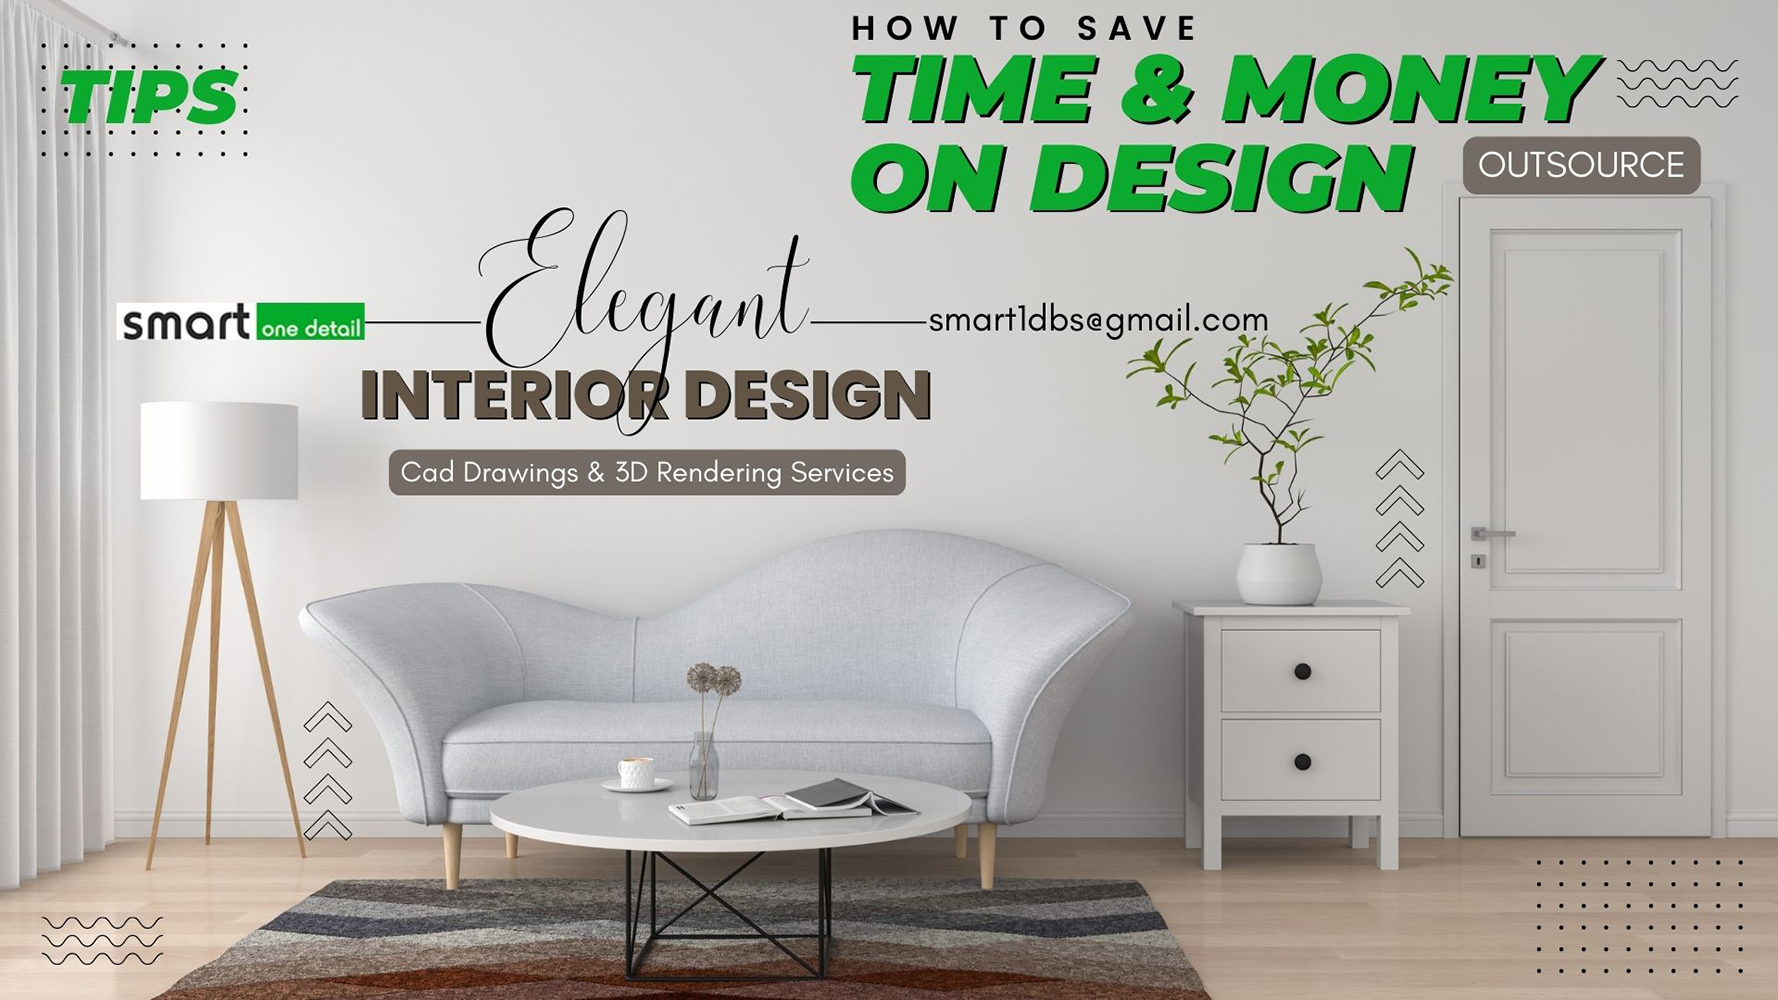 DO YOU KNOW, HOW TO SAVE TIME AND MONEY ON INTERIOR PROJECTS?